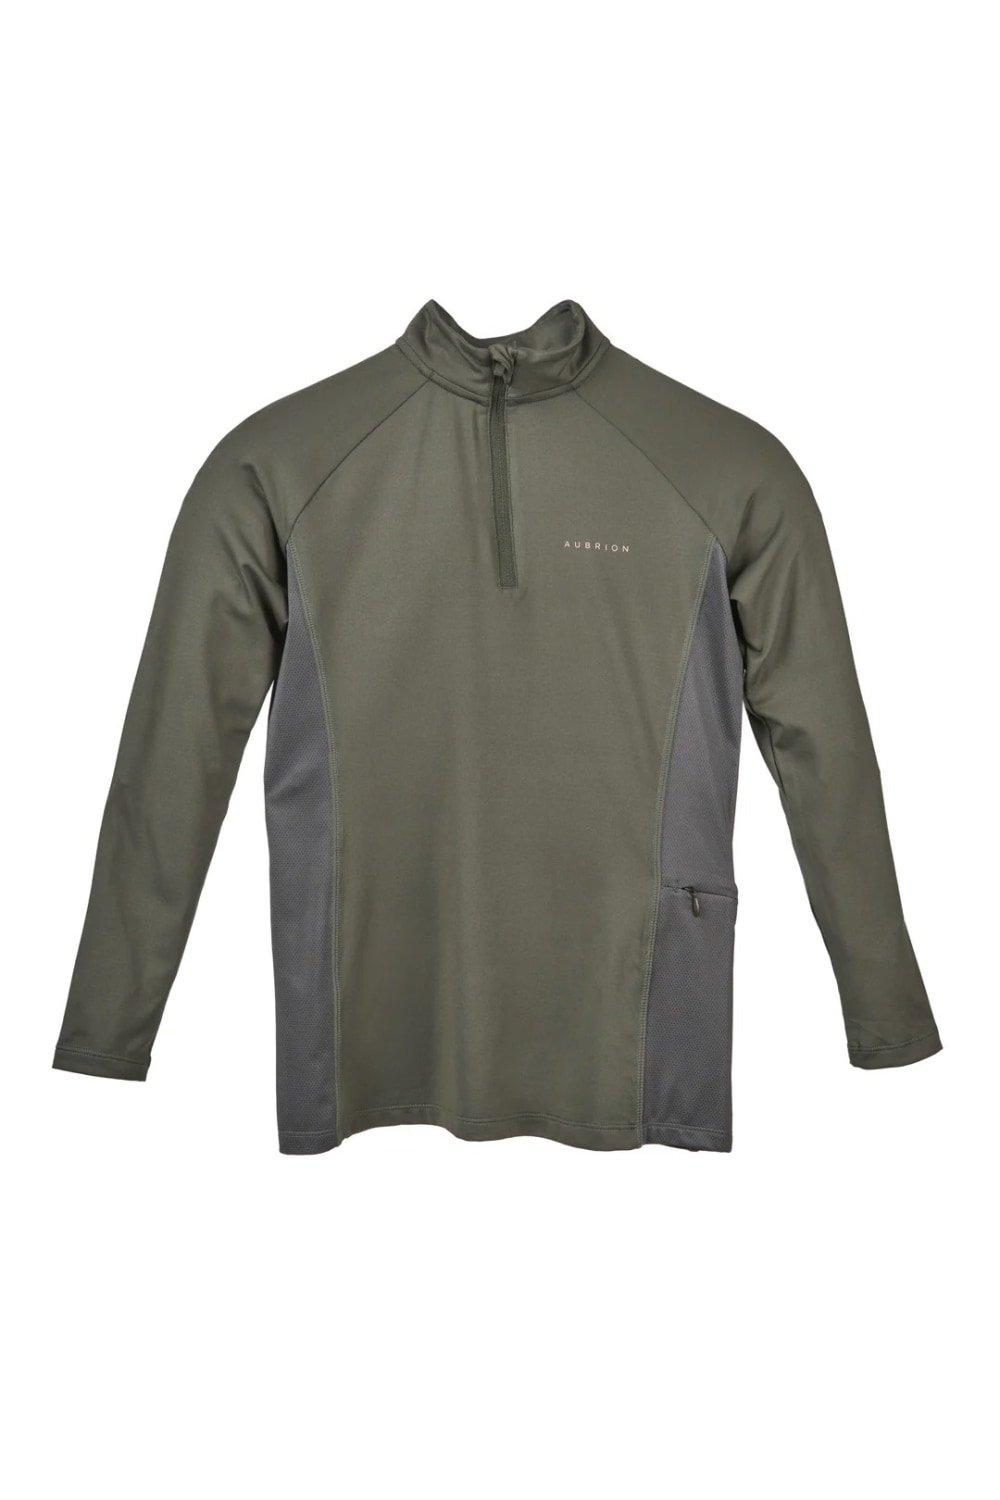 Revive Long-Sleeved Base Layer Top